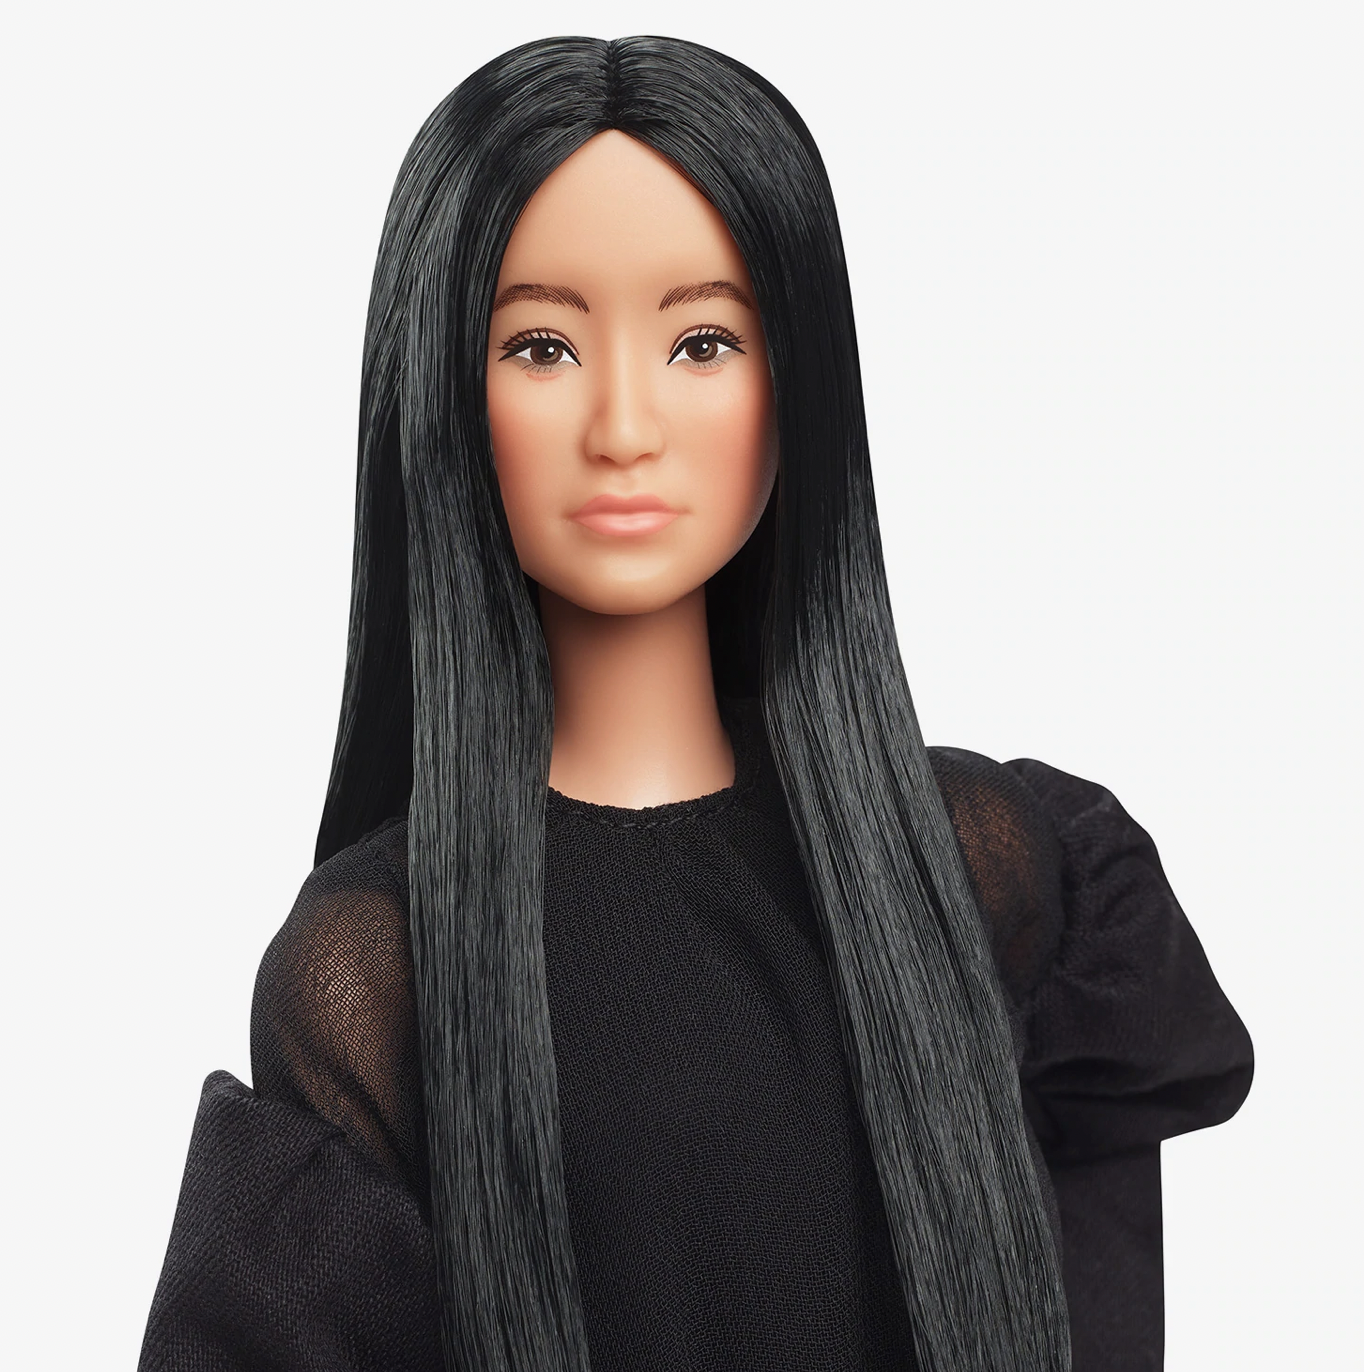 2022 Black Label: Tribute Collection Vera Wang Barbie Doll